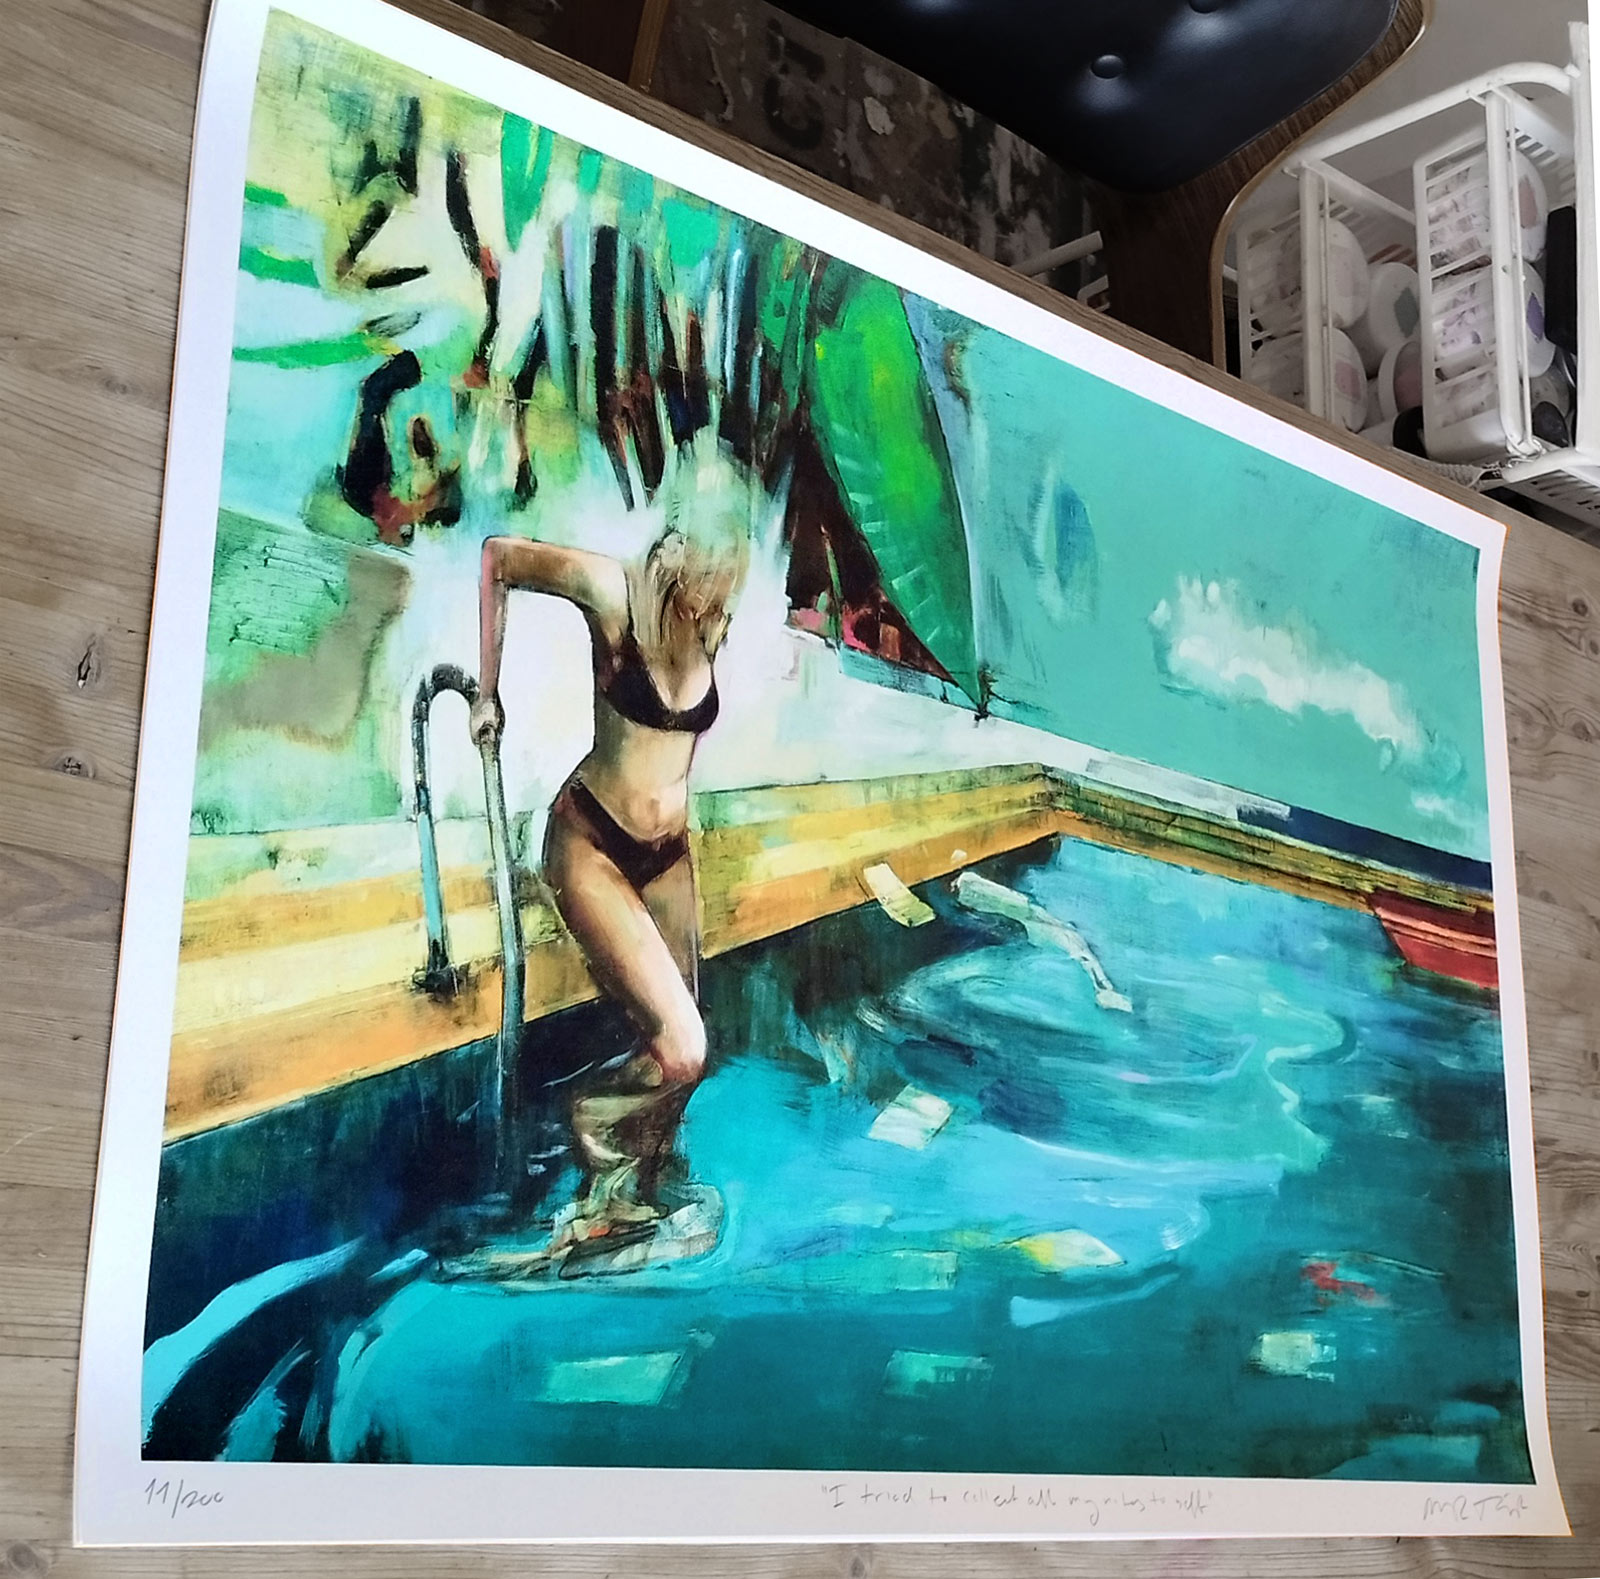 posters-prints, giclee-print, aesthetic, colorful, graphical, illustrative, pop, portraiture, bodies, botany, oceans, blue, green, turquoise, ink, paper, beach, beautiful, contemporary-art, danish, decorative, interior, interior-design, modern, modern-art, nordic, pretty, sailboat, scandinavien, summer, Buy original high quality art. Paintings, drawings, limited edition prints & posters by talented artists.